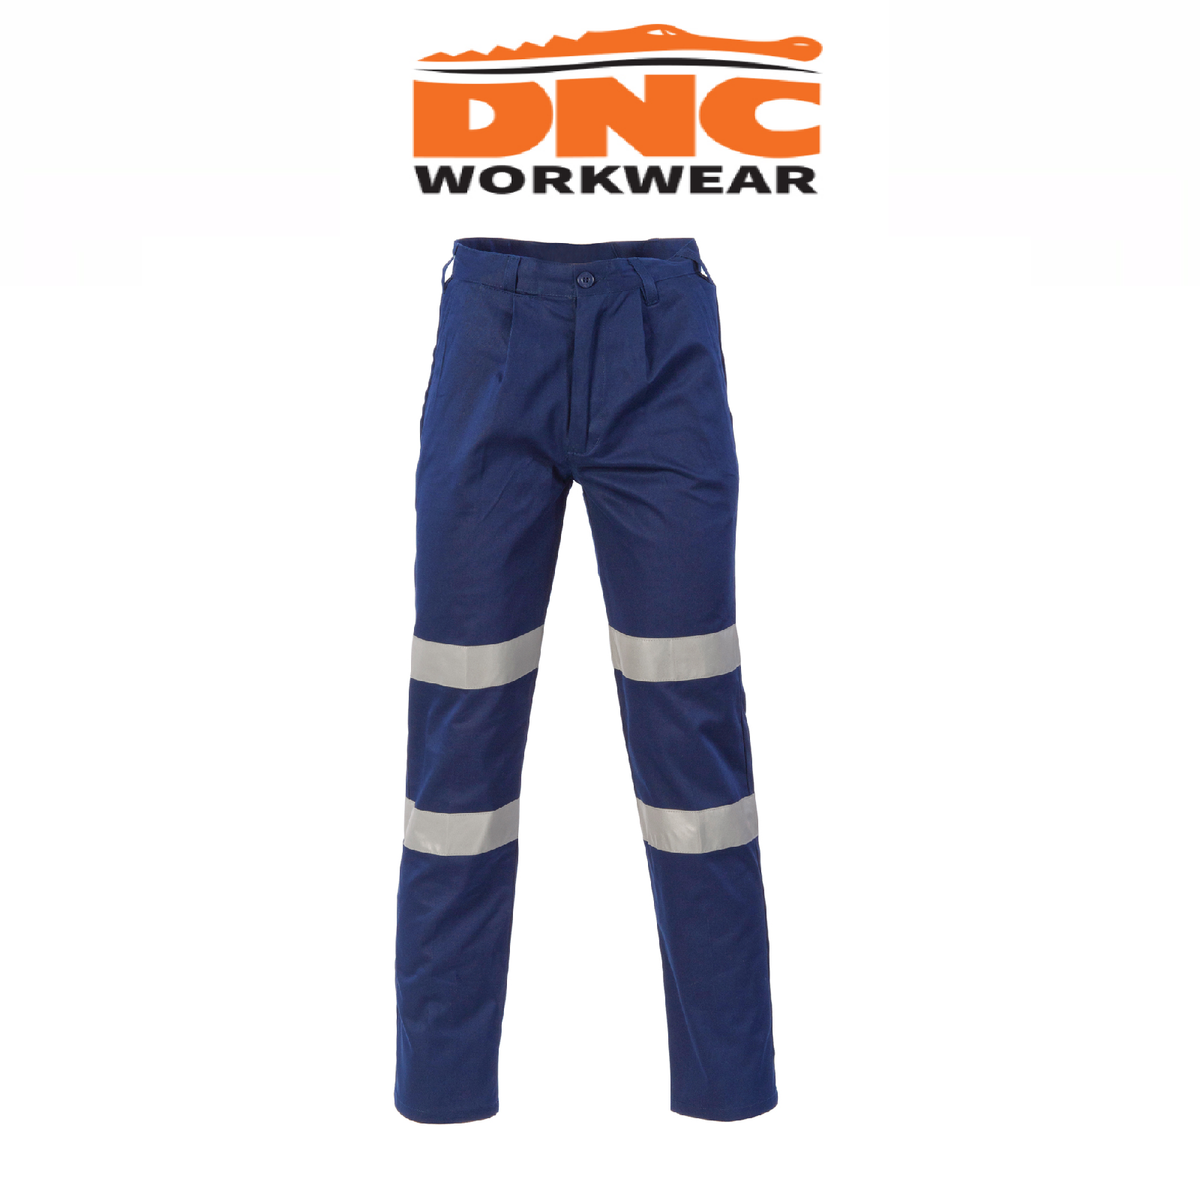 DNC Workwear Mens Middle Weight Double hoops Taped Pants Work Pants 3354